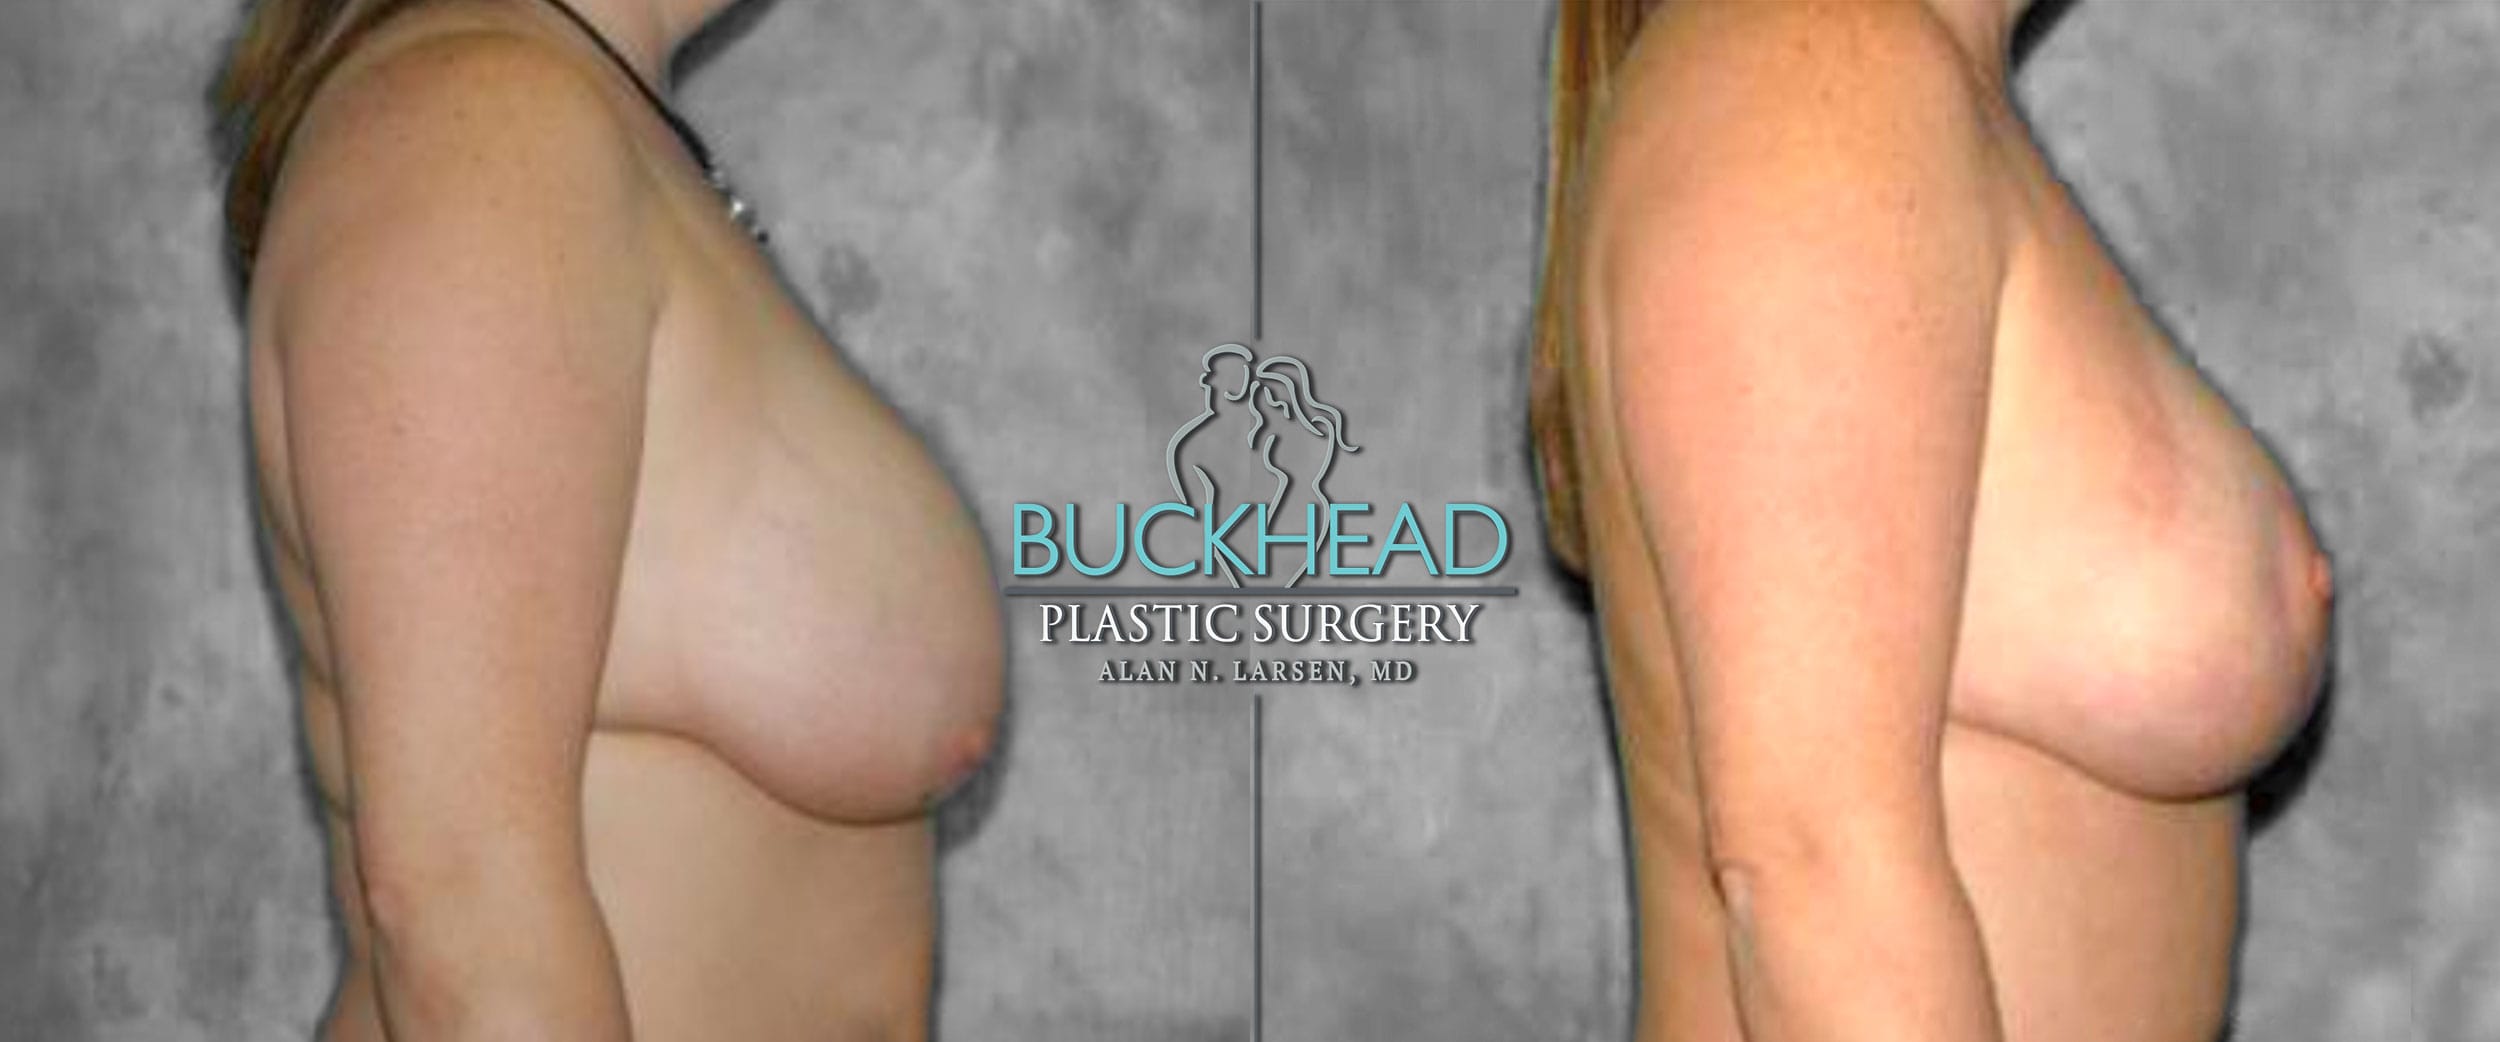 Before and After Photo Gallery | Breast Lift | Buckhead Plastic Surgery | Alan N. Larsen, MD | Double Board-Certified Plastic Surgeon | Atlanta GA